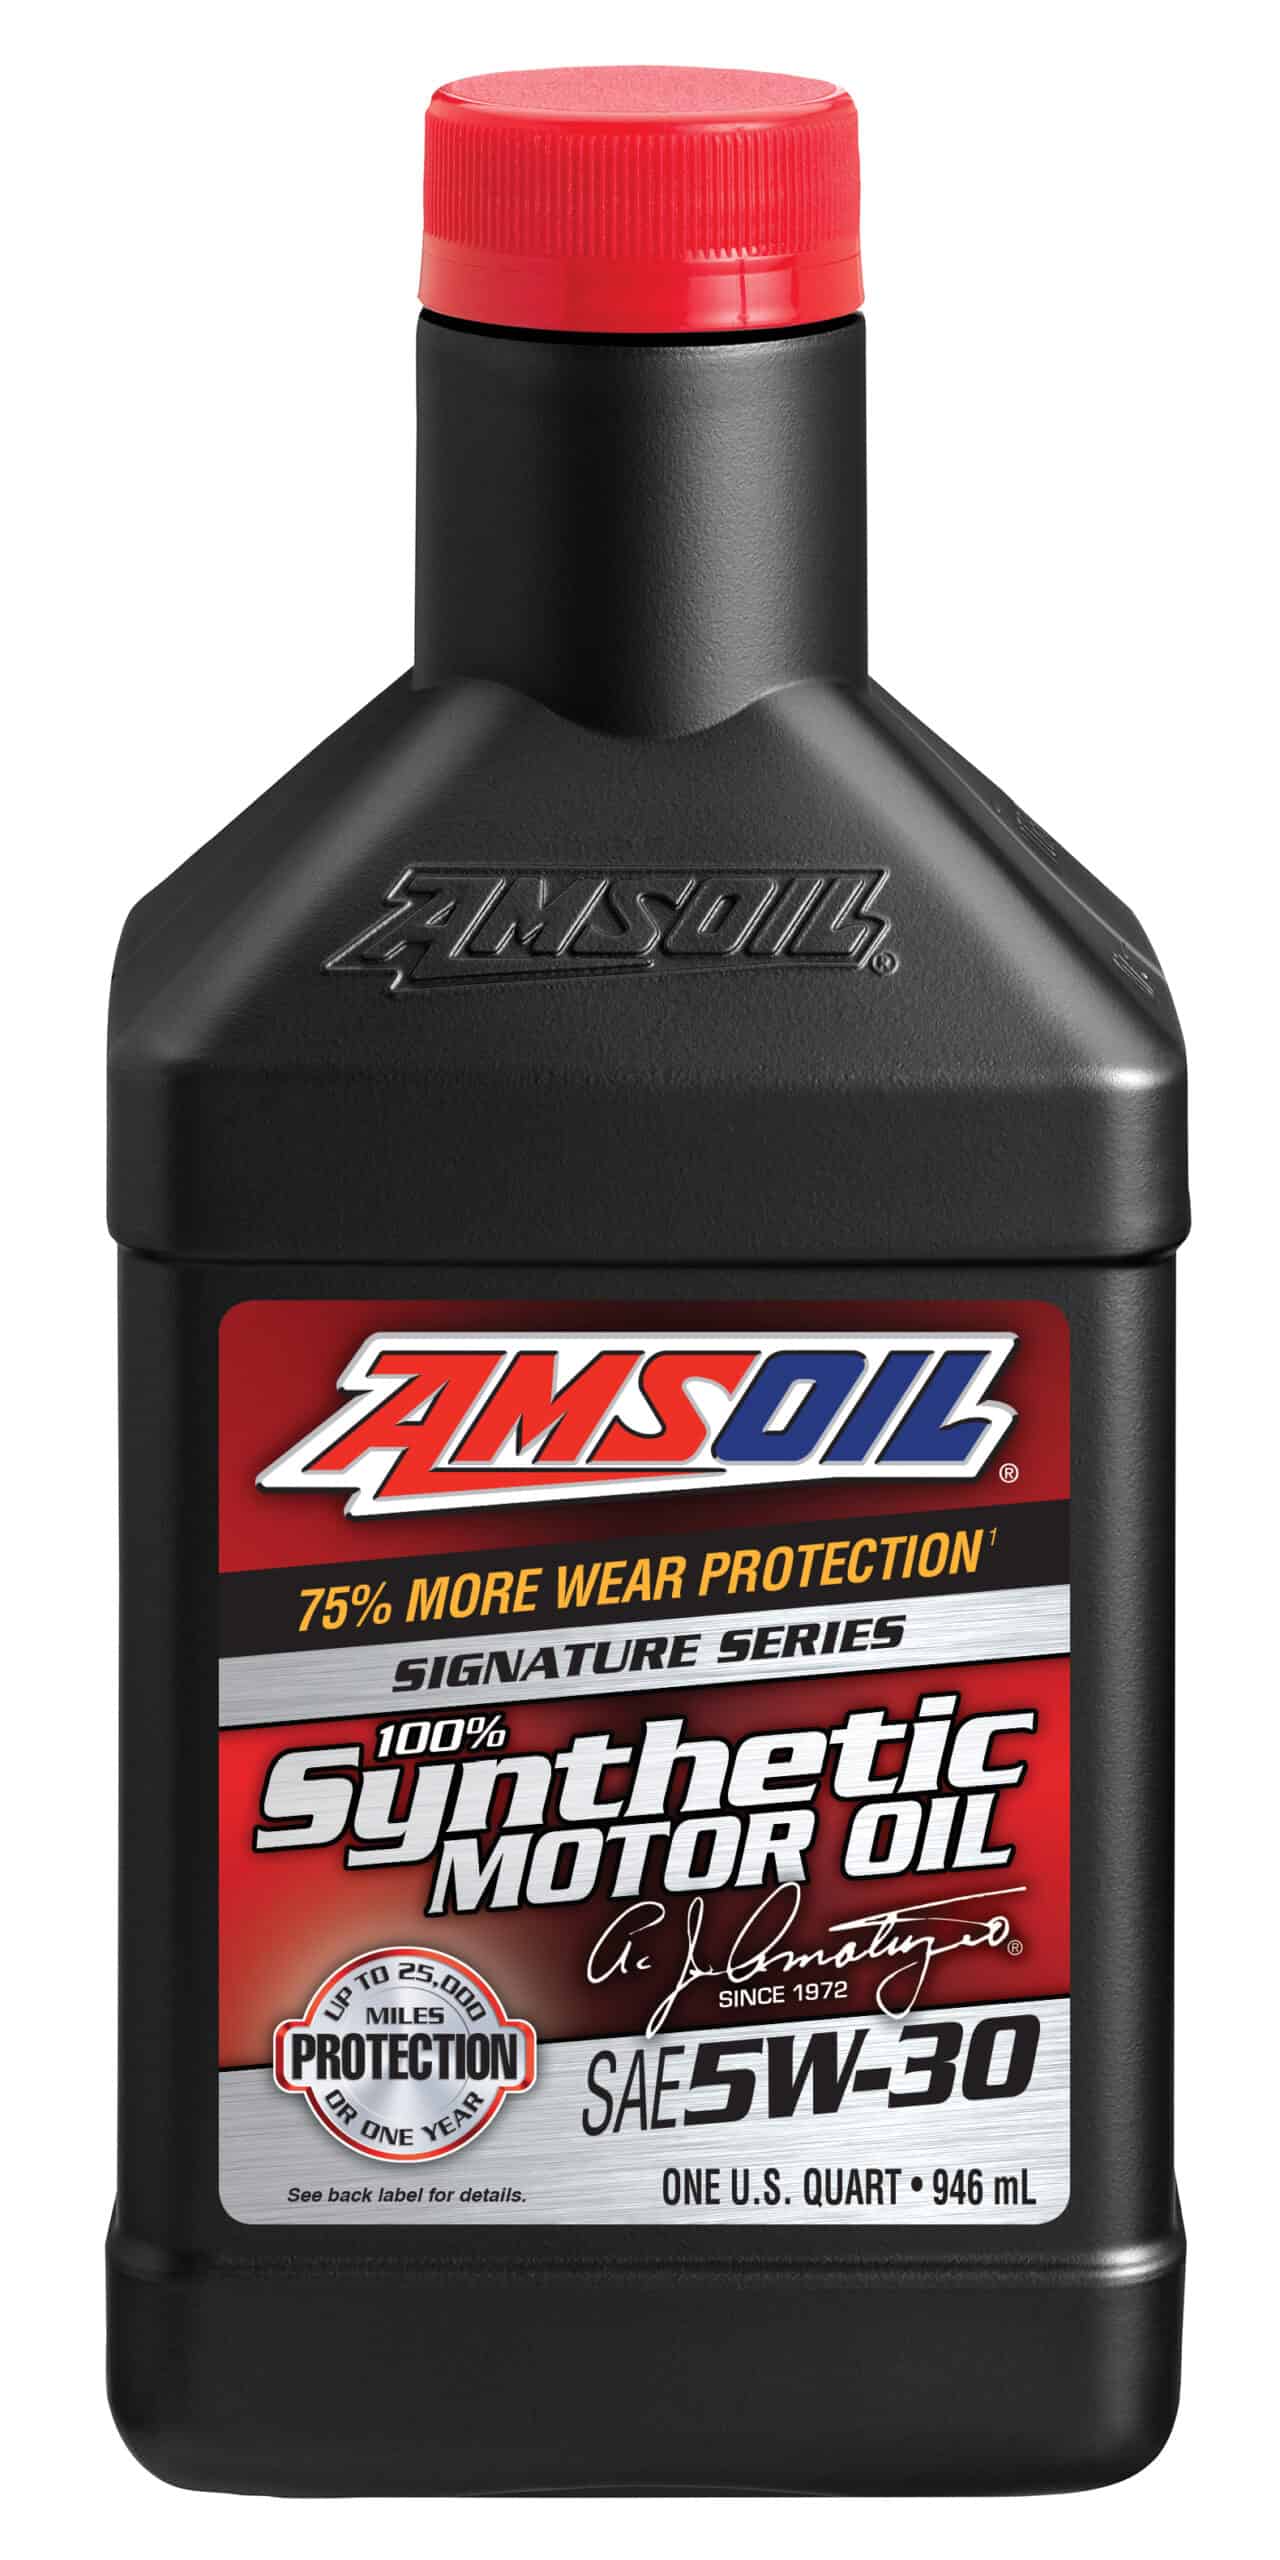 A bottle of AMSOIL Synthetic Automatic Transmission Fluid, formulated to withstand the rigors of heavy towing, elevated temperatures & challenging terrain.